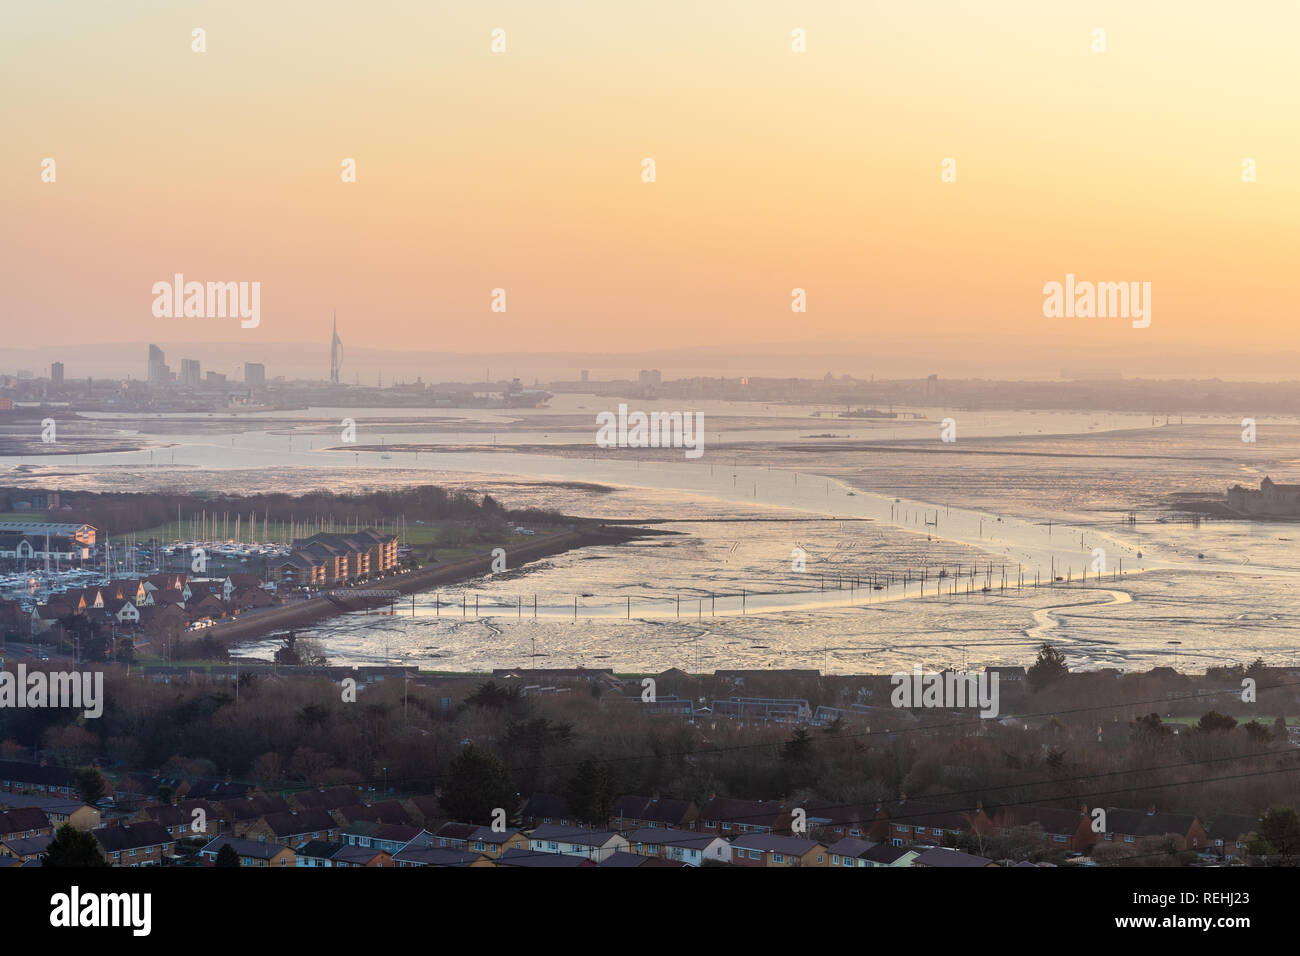 Sunset view from Portsdown Hill at dusk over Paulsgrove Lake and Port Solent and the Spnnaker Tower in the distance, Portsmouth skyline, Hampshire, UK Stock Photo